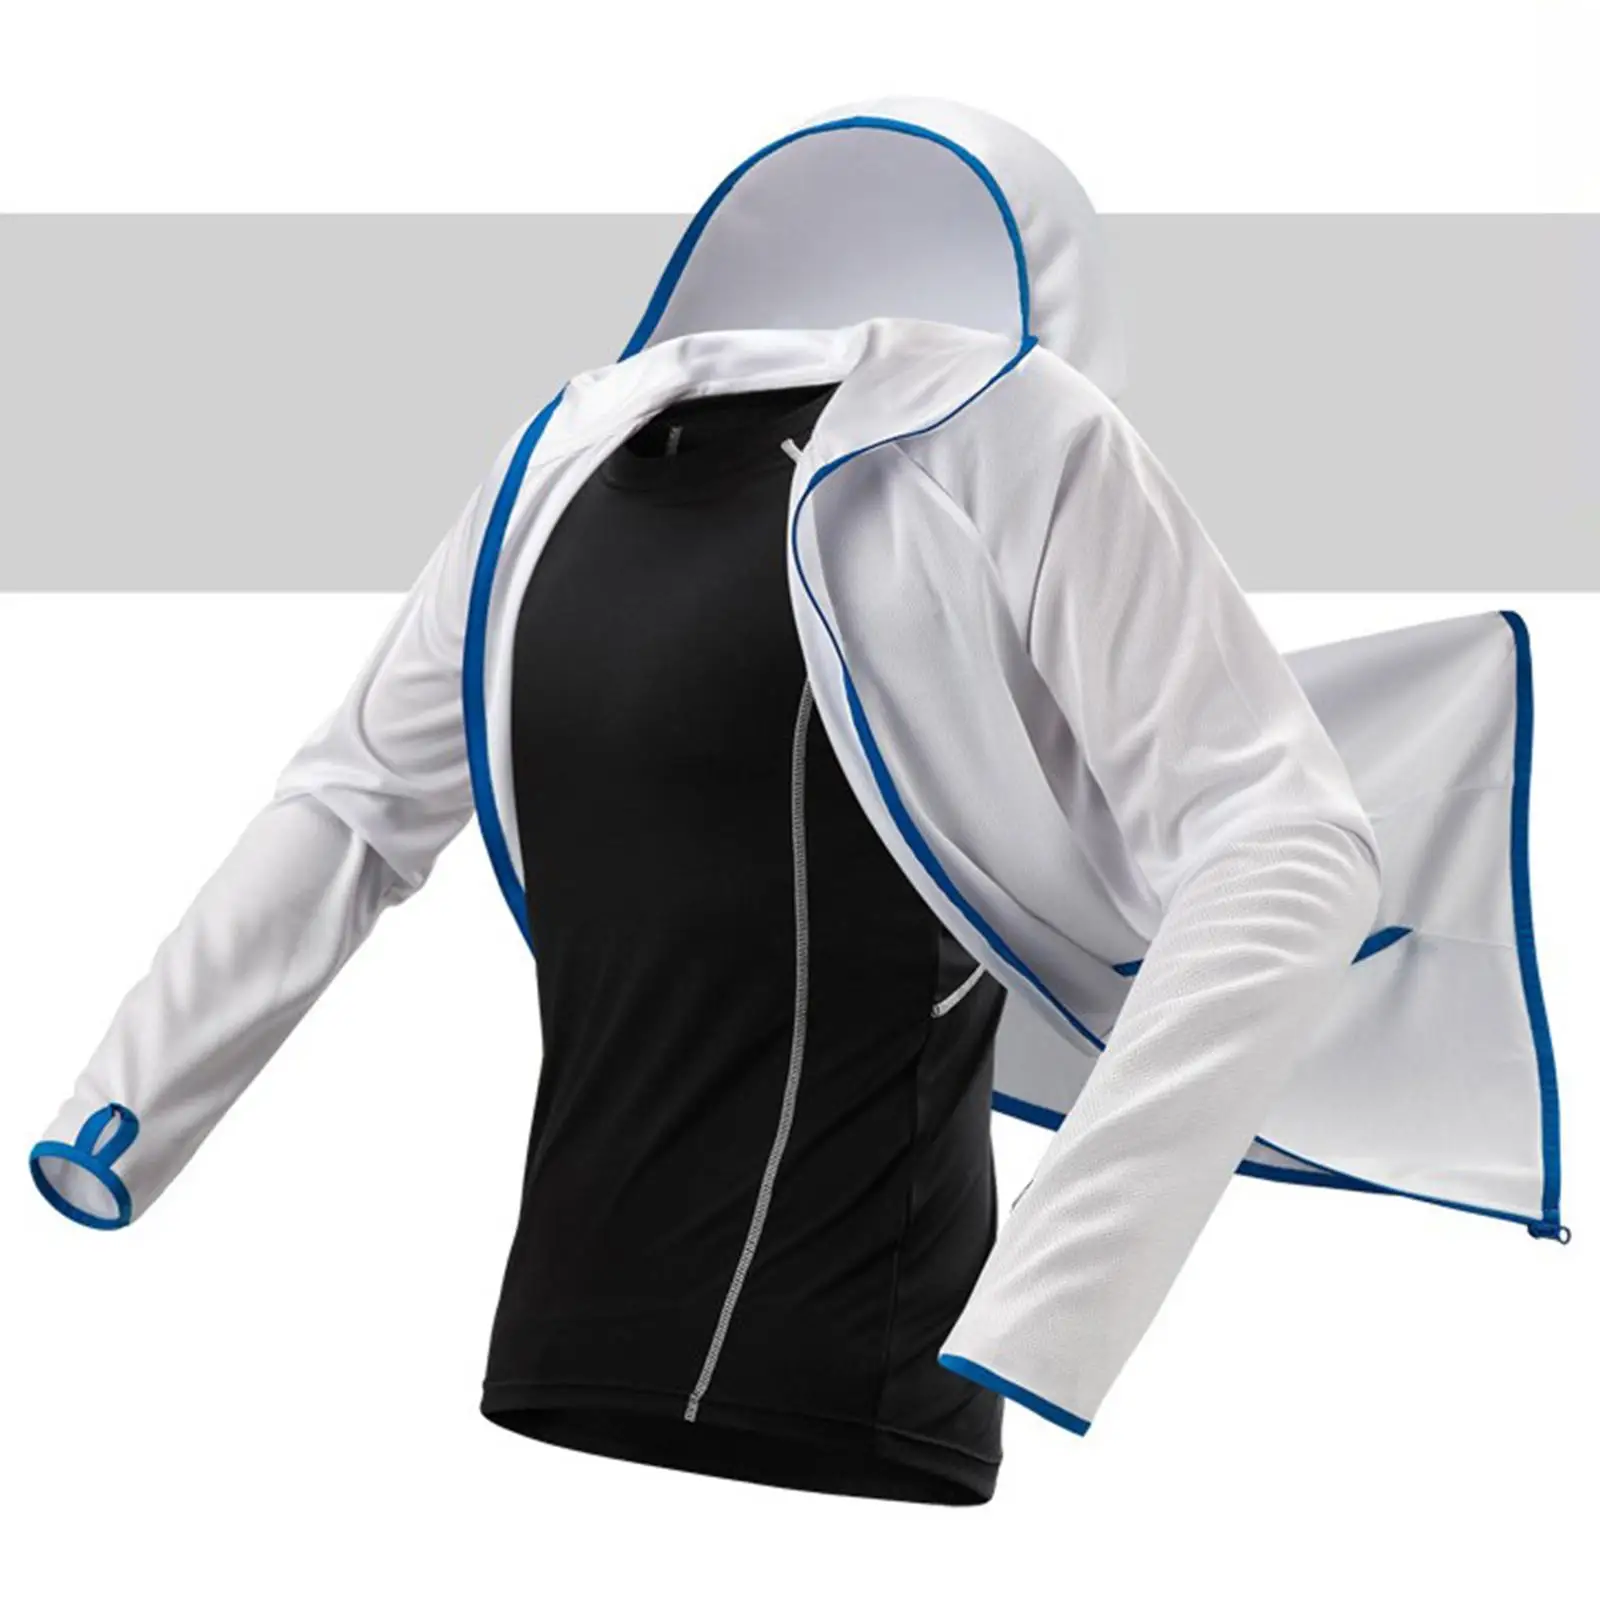 Outdoor light Hooded Jacket Through Protective Shirt for